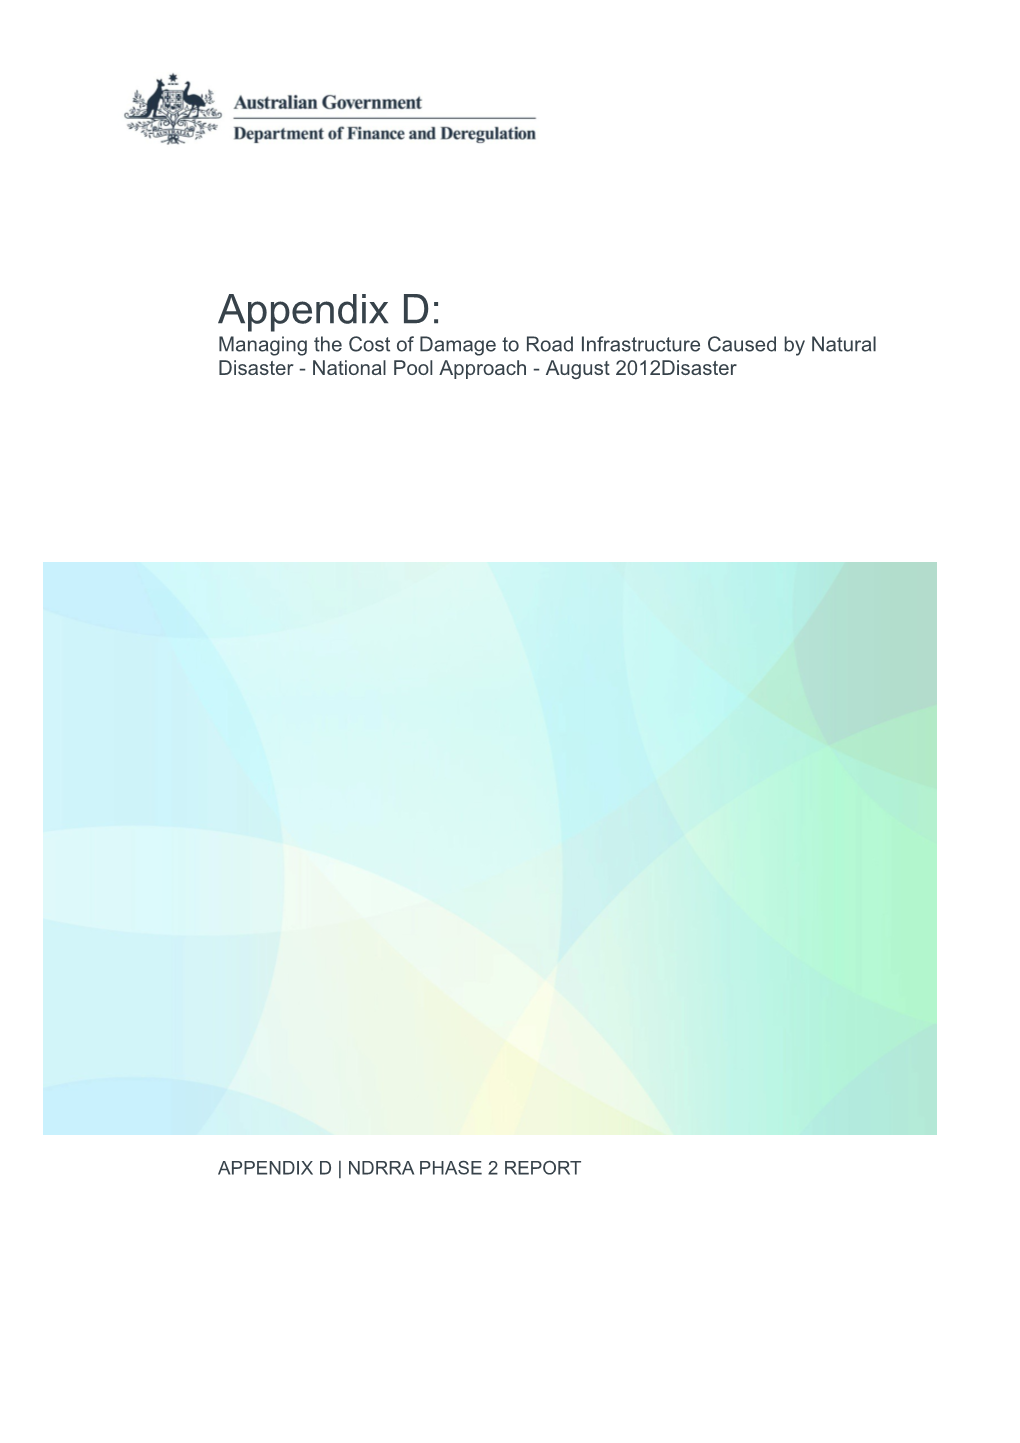 Appendix D - Managing the Cost of Damage to Road Infrastructure Caused by Natural Disaster